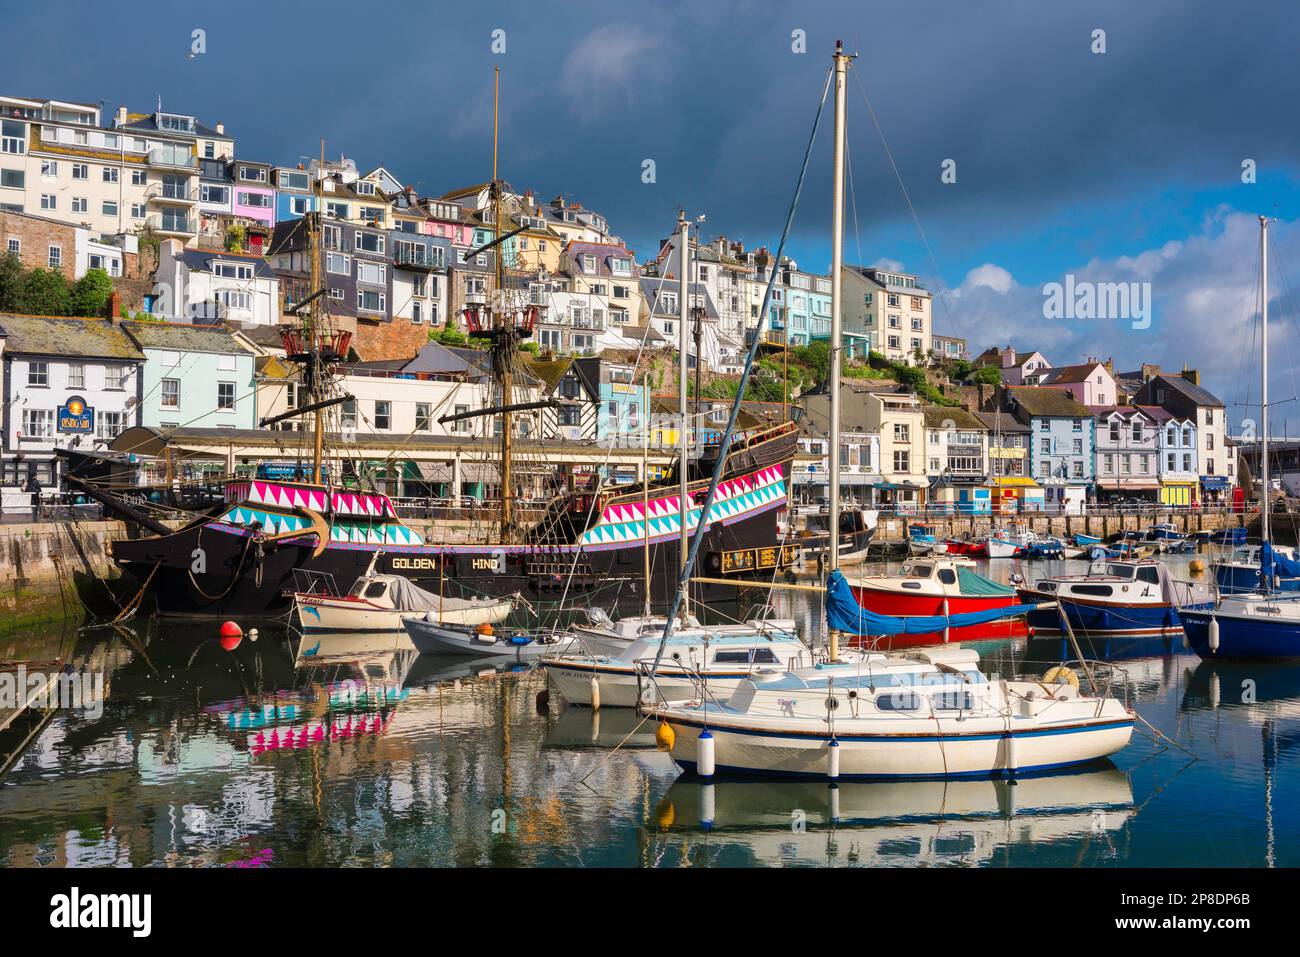 Brixham Devon UK, view of yachts and a replica of the historic Golden Hind in the harbour at Brixham, Torbay, Devon, south west England, UK Stock Photo